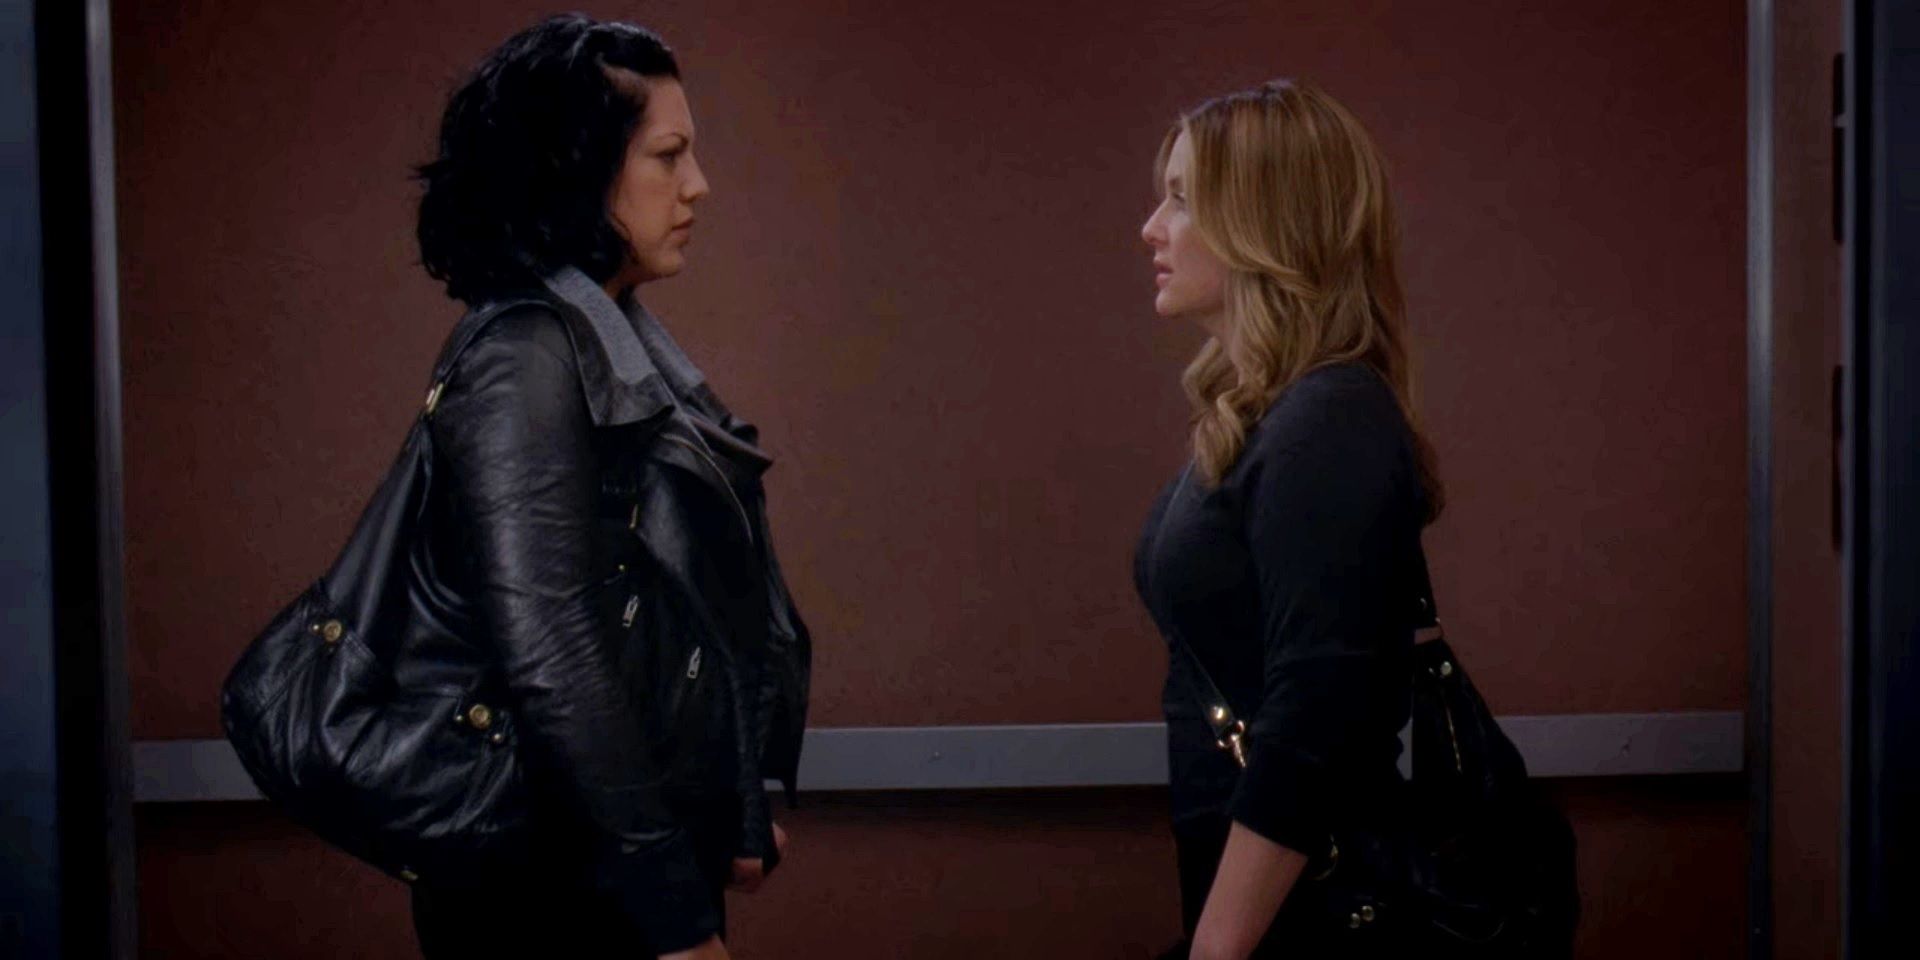 Callie and Arizona facing each other in an elevator in Grey's Anatomy season 7.